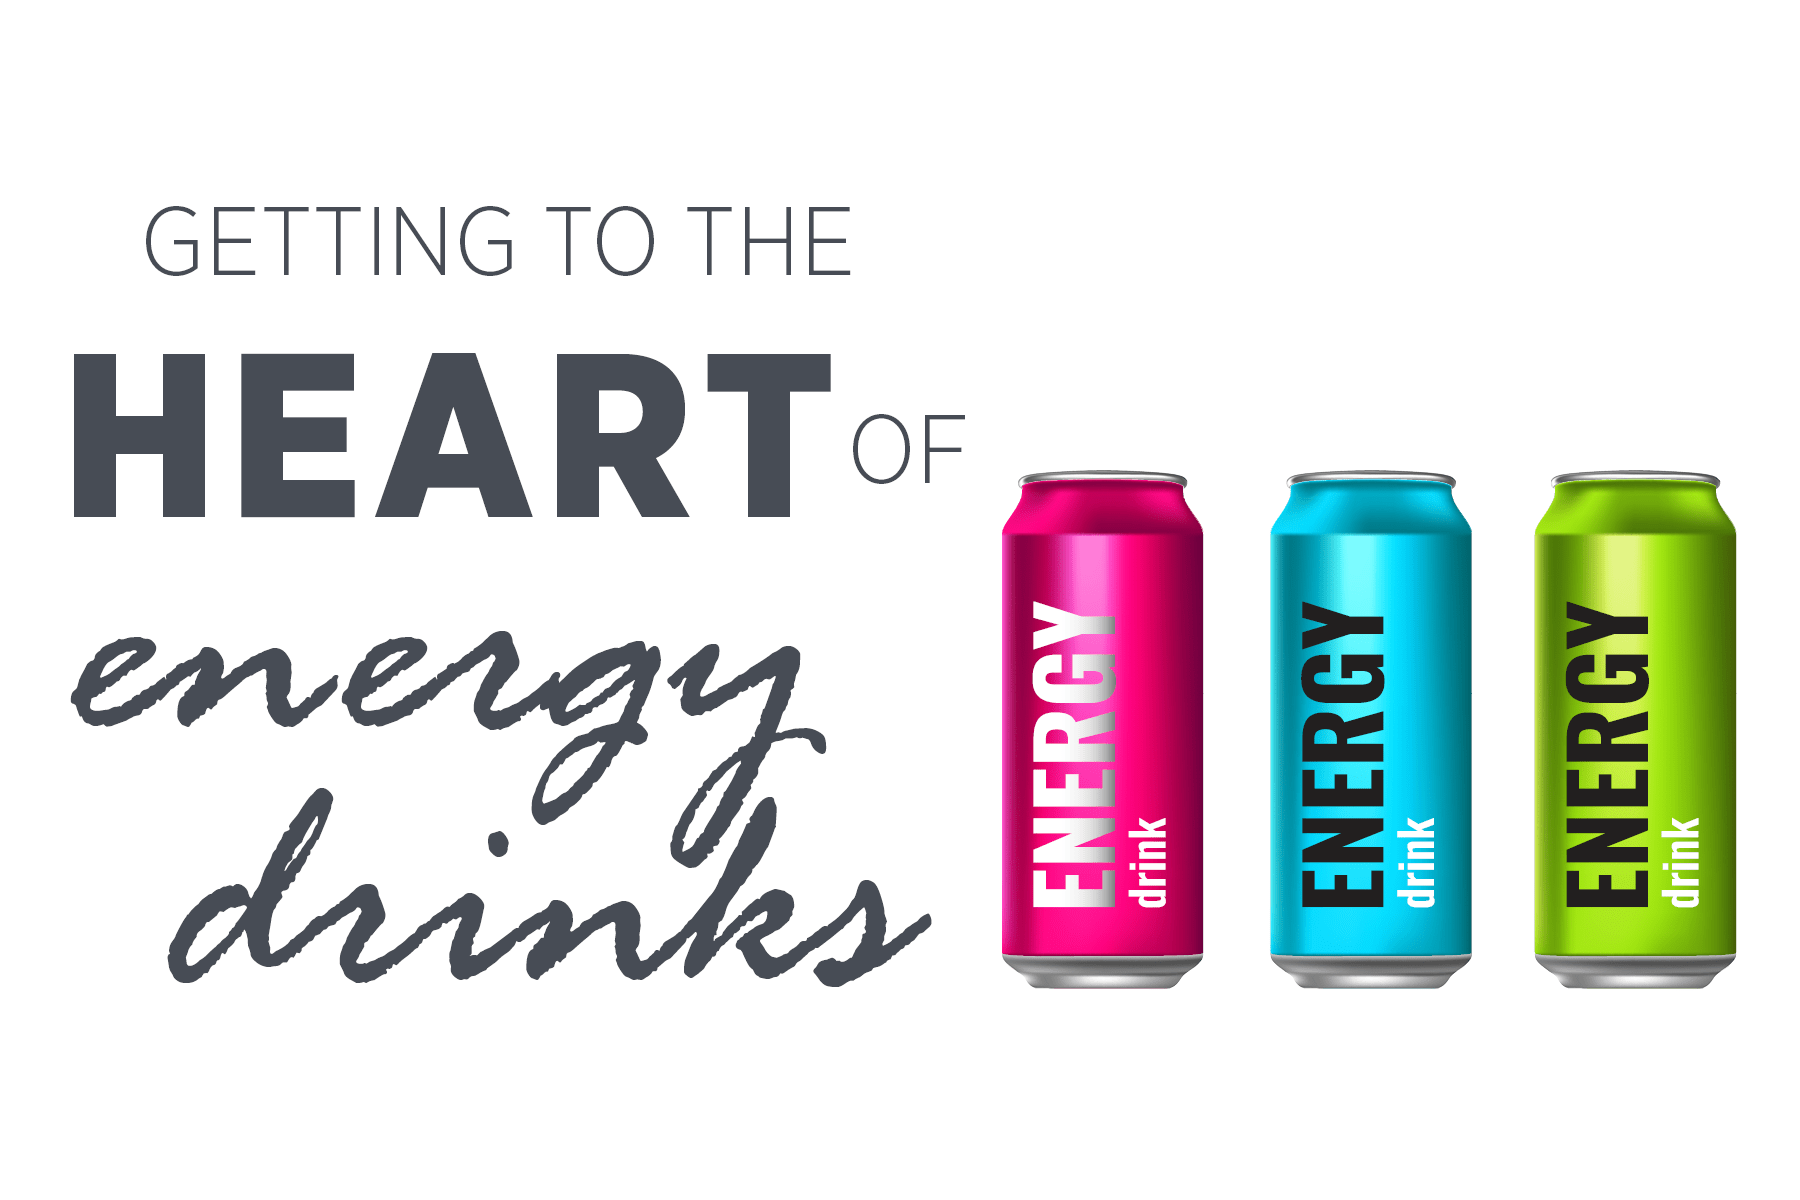 Getting to the Heart of Energy Drinks